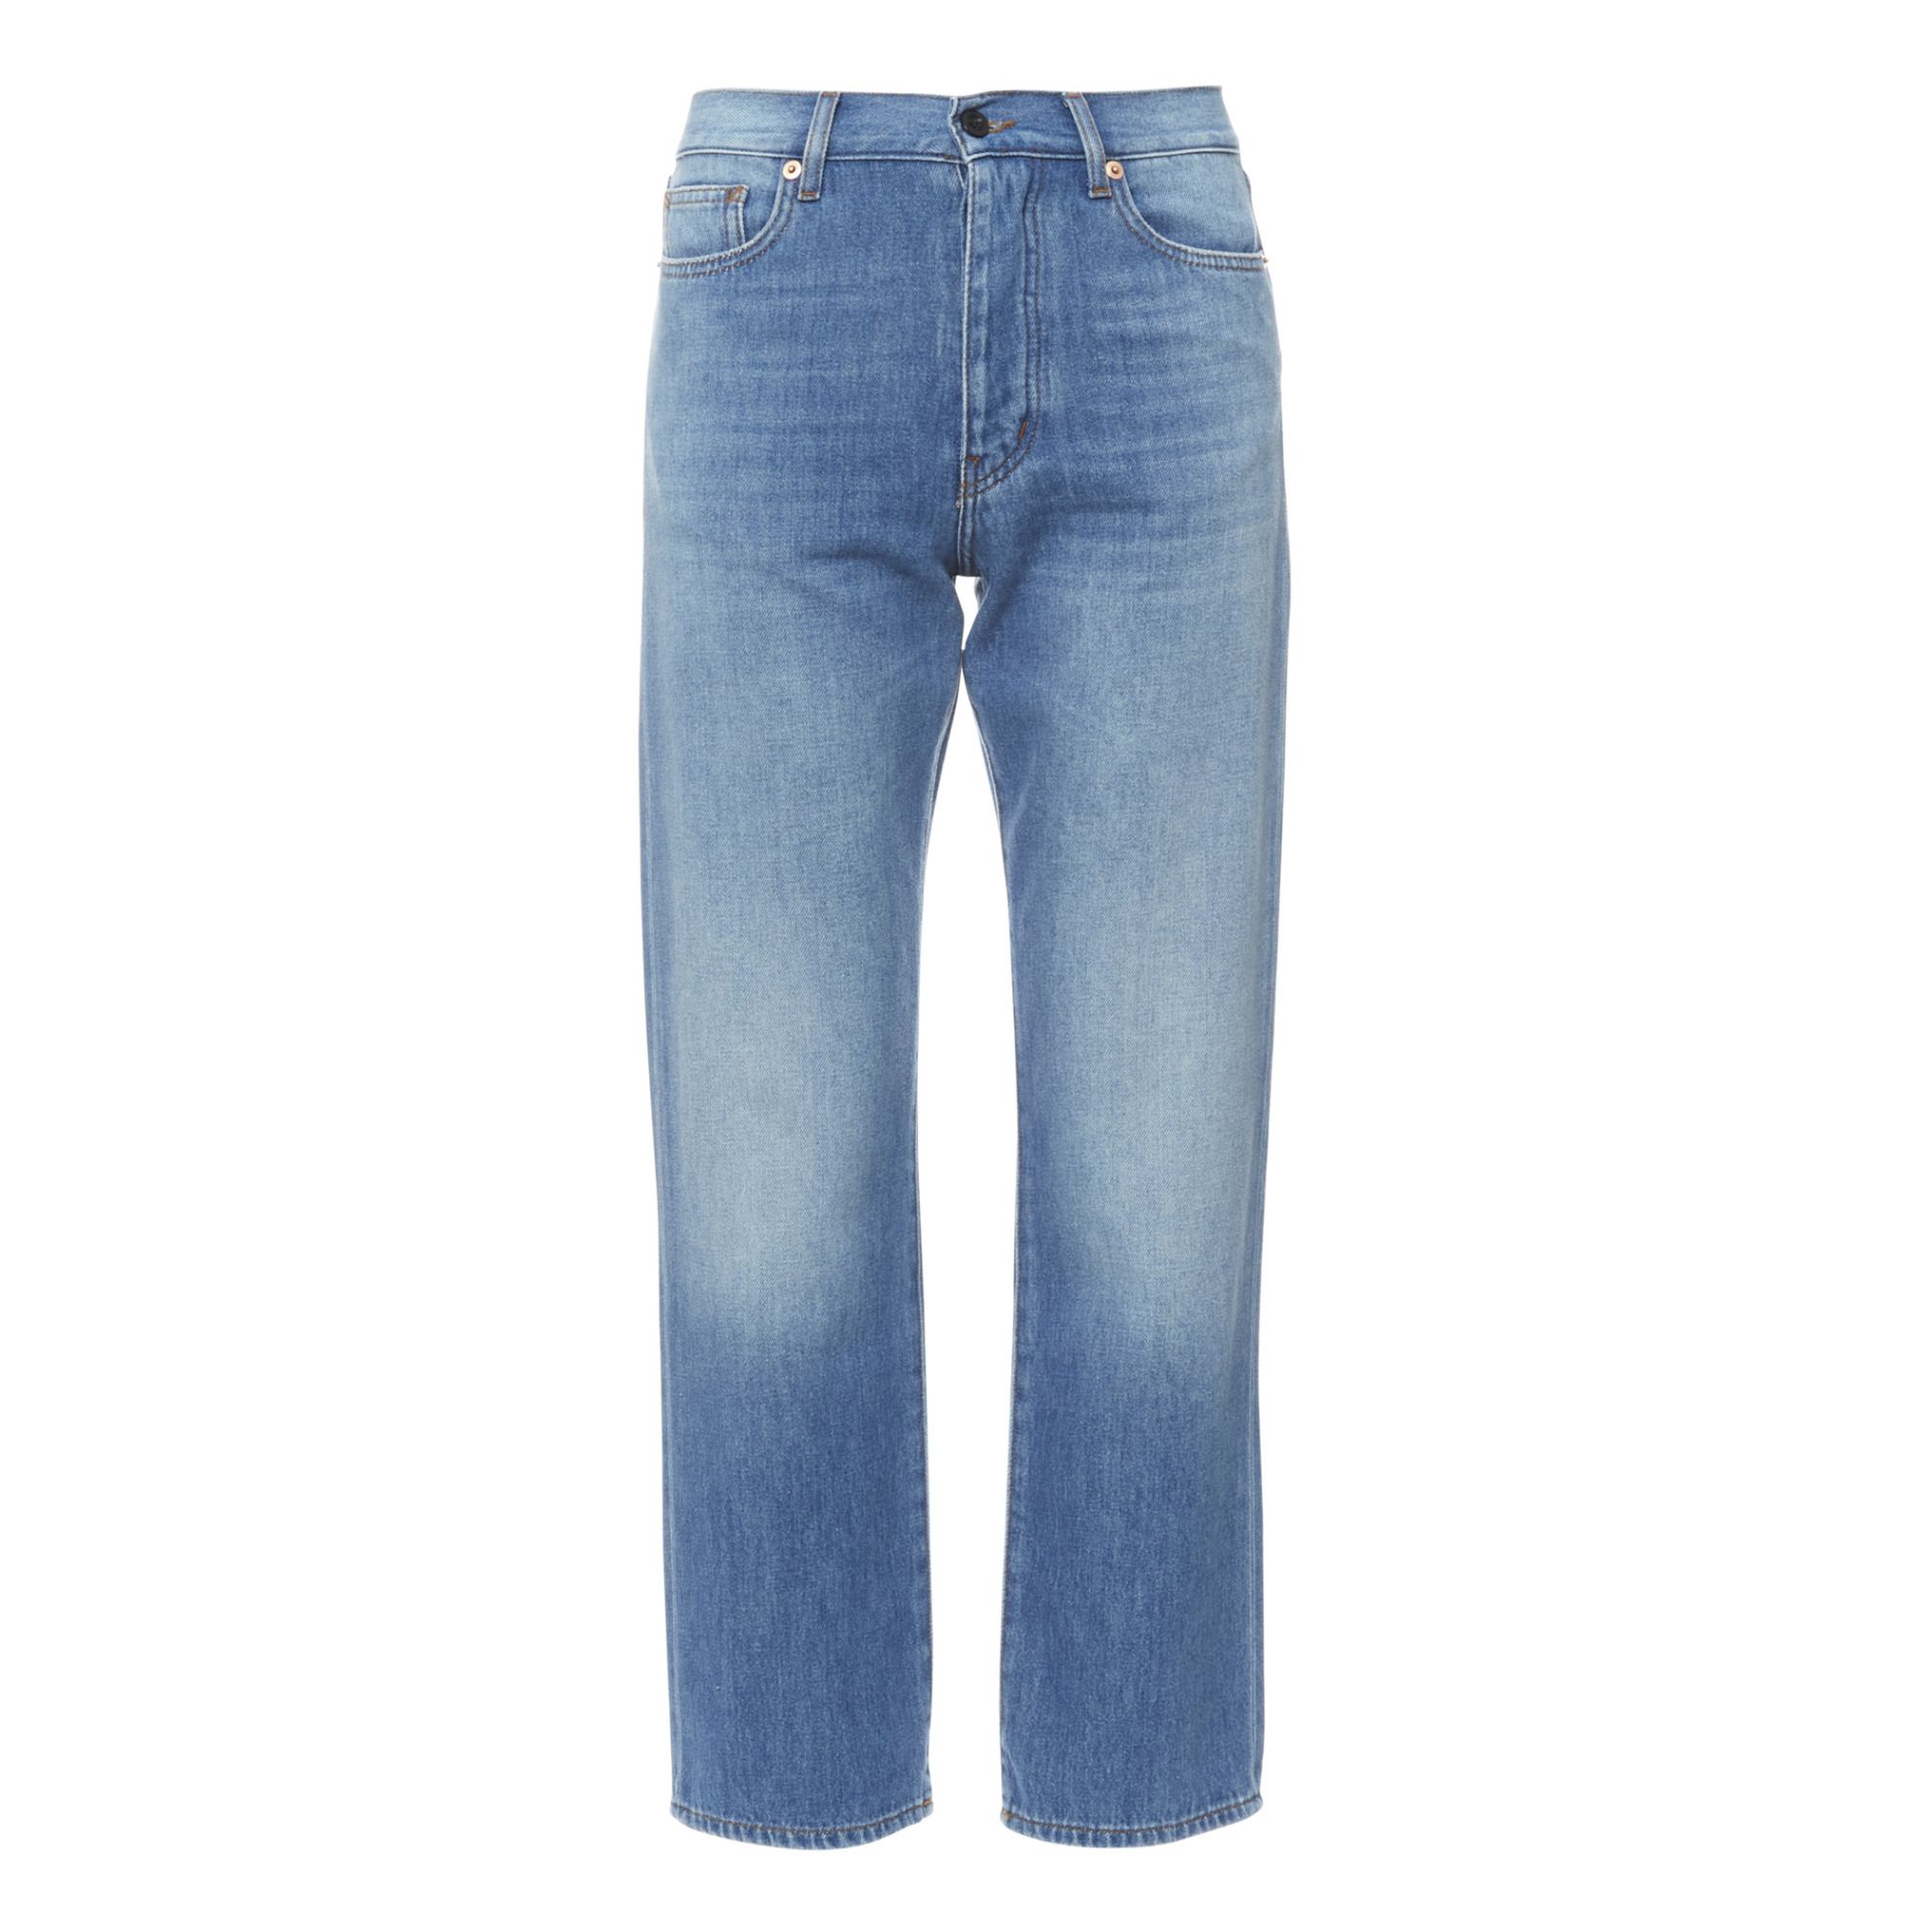 Bellerose - Popeye Jeans - Women's Collection - - Light Blue | Smallable